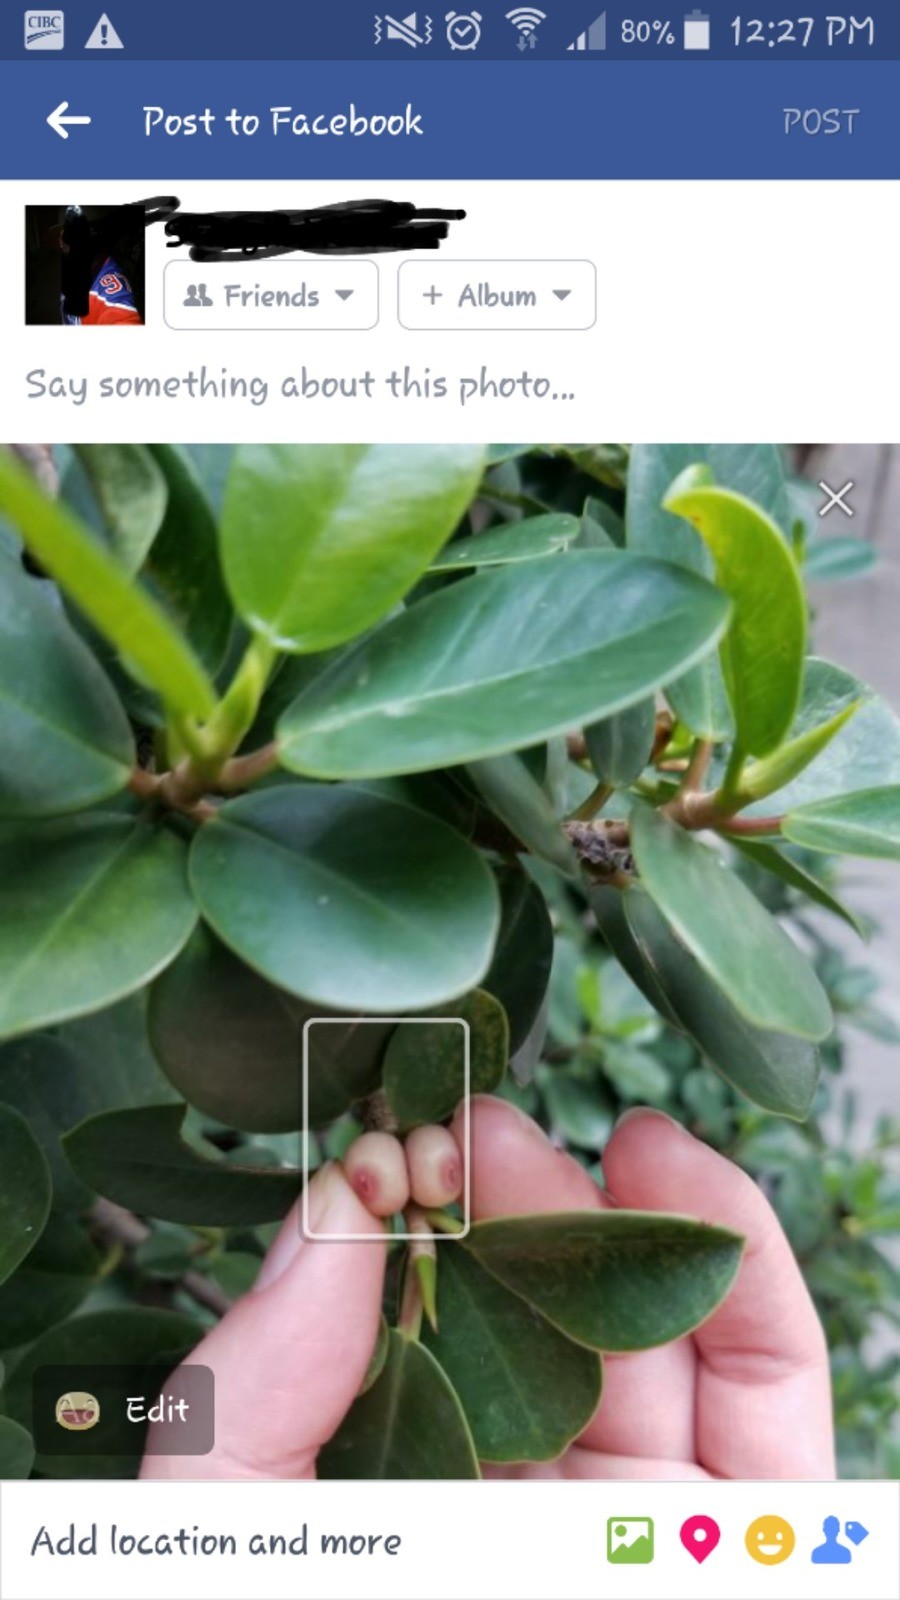 My eyes r up here.. Facebook sees a person and not just ur boobs.. 6 Post to Facebook Sag alladin abour this photo... Add location and more. Watch mods have a meltdown because of berries.